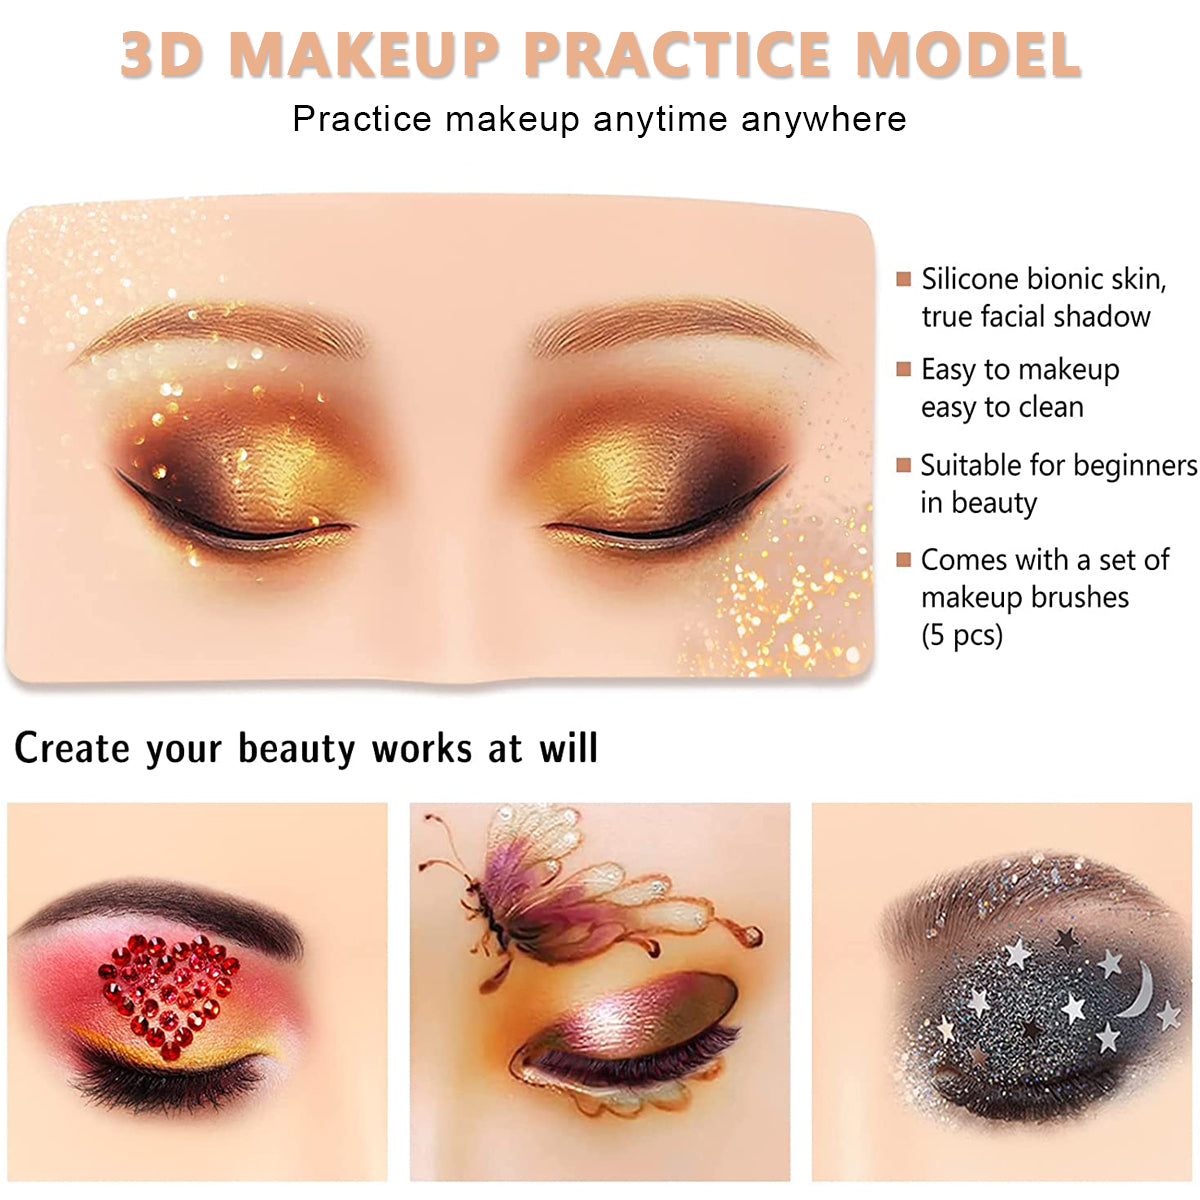 MAYCREATE  Makeup Practice Face Board Skin Realistic 3D Makeup Practice Skin for Eyebrow, Eye Makeup Dummy For Women, Reusable Silicone Makeup Face for Beginner Makeup Artist The Perfect